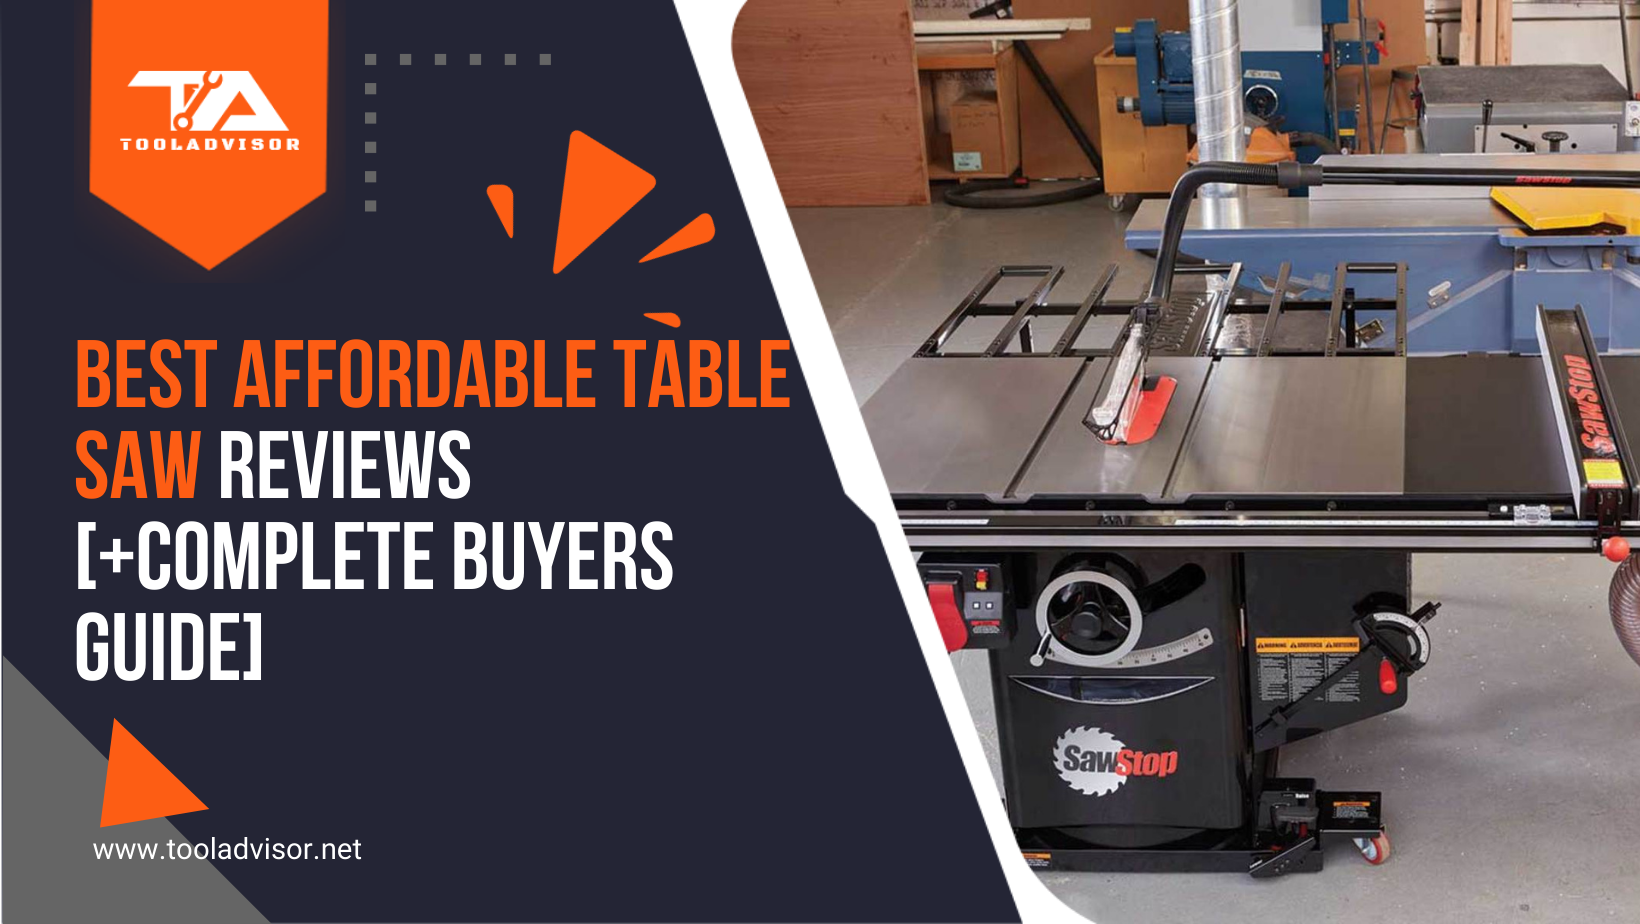 8 Best Affordable Table Saw Reviews in 2022 [+Complete Buyers Guide]